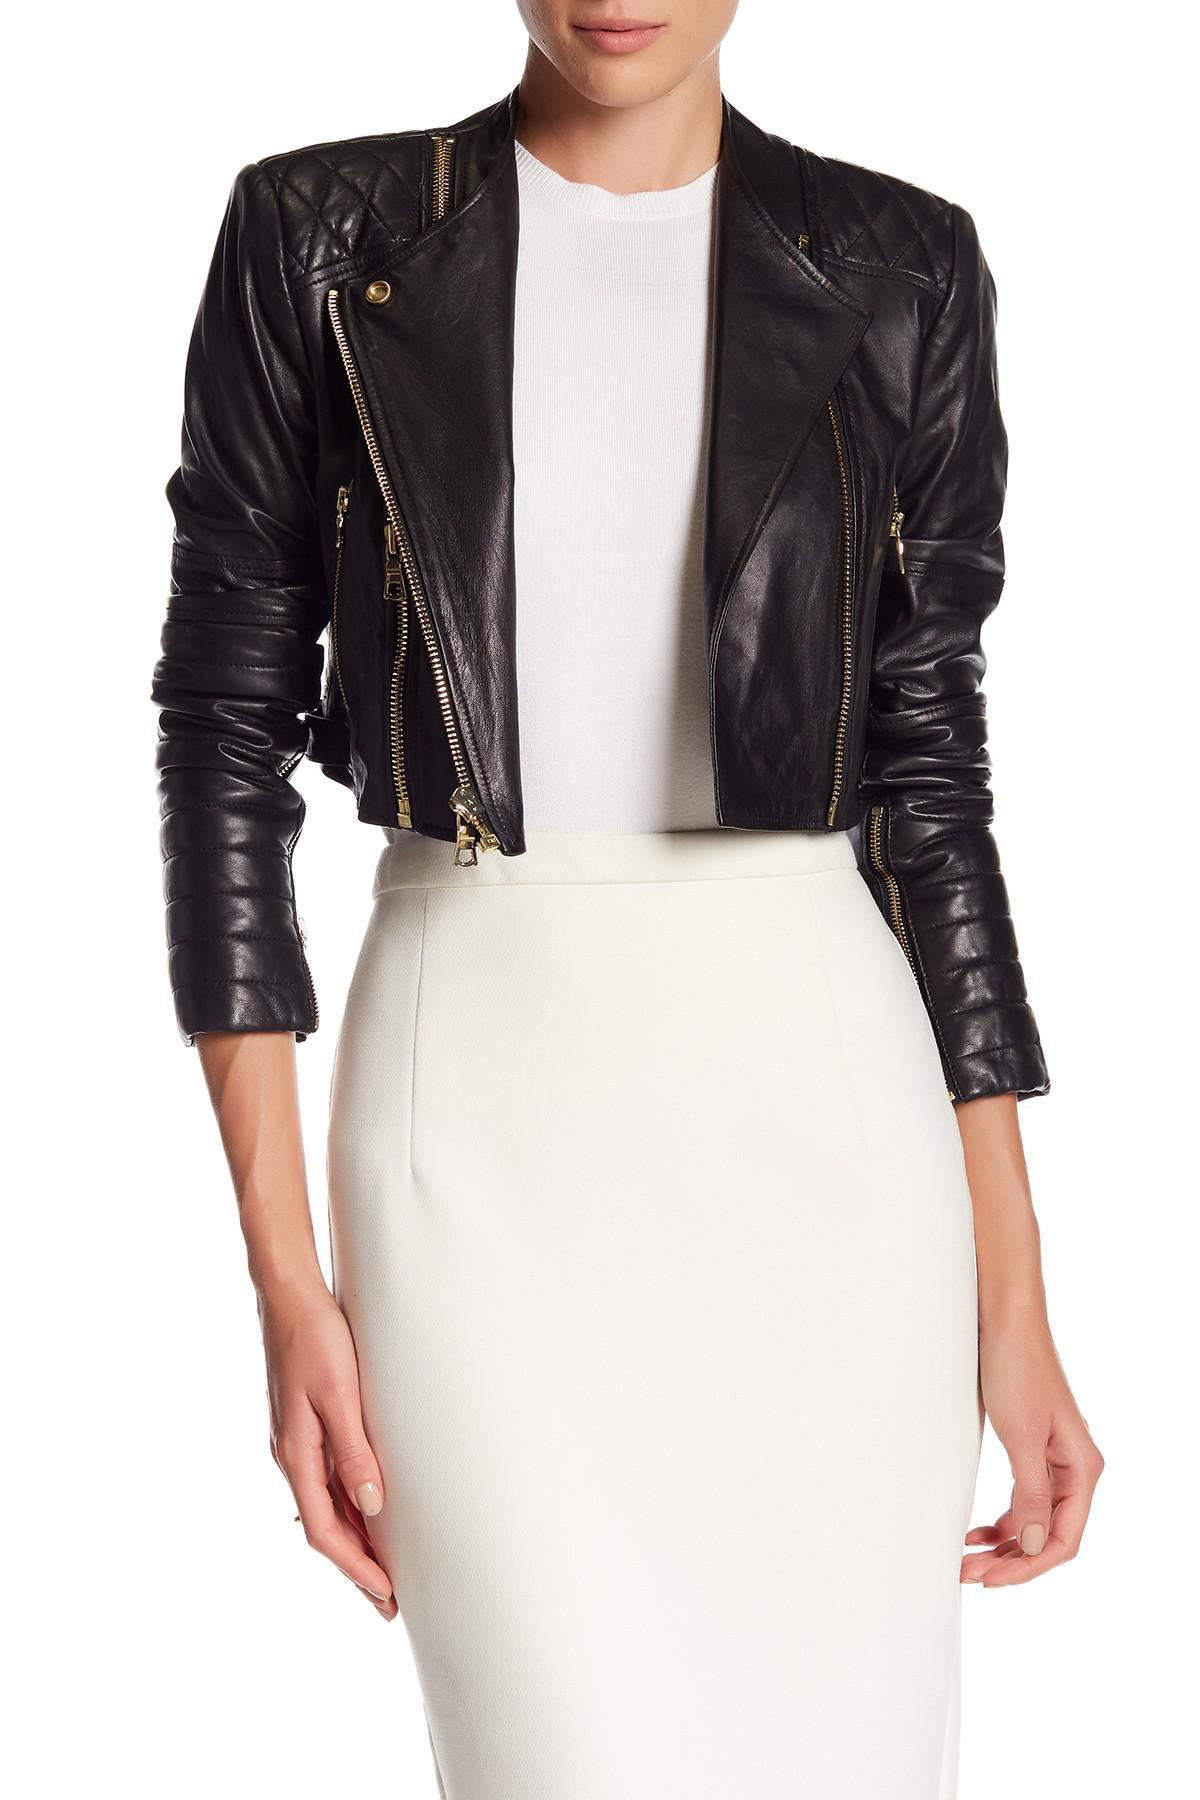 Alice + Olivia Fin Cropped Genuine Lamb Leather Jacket in Black | Lyst